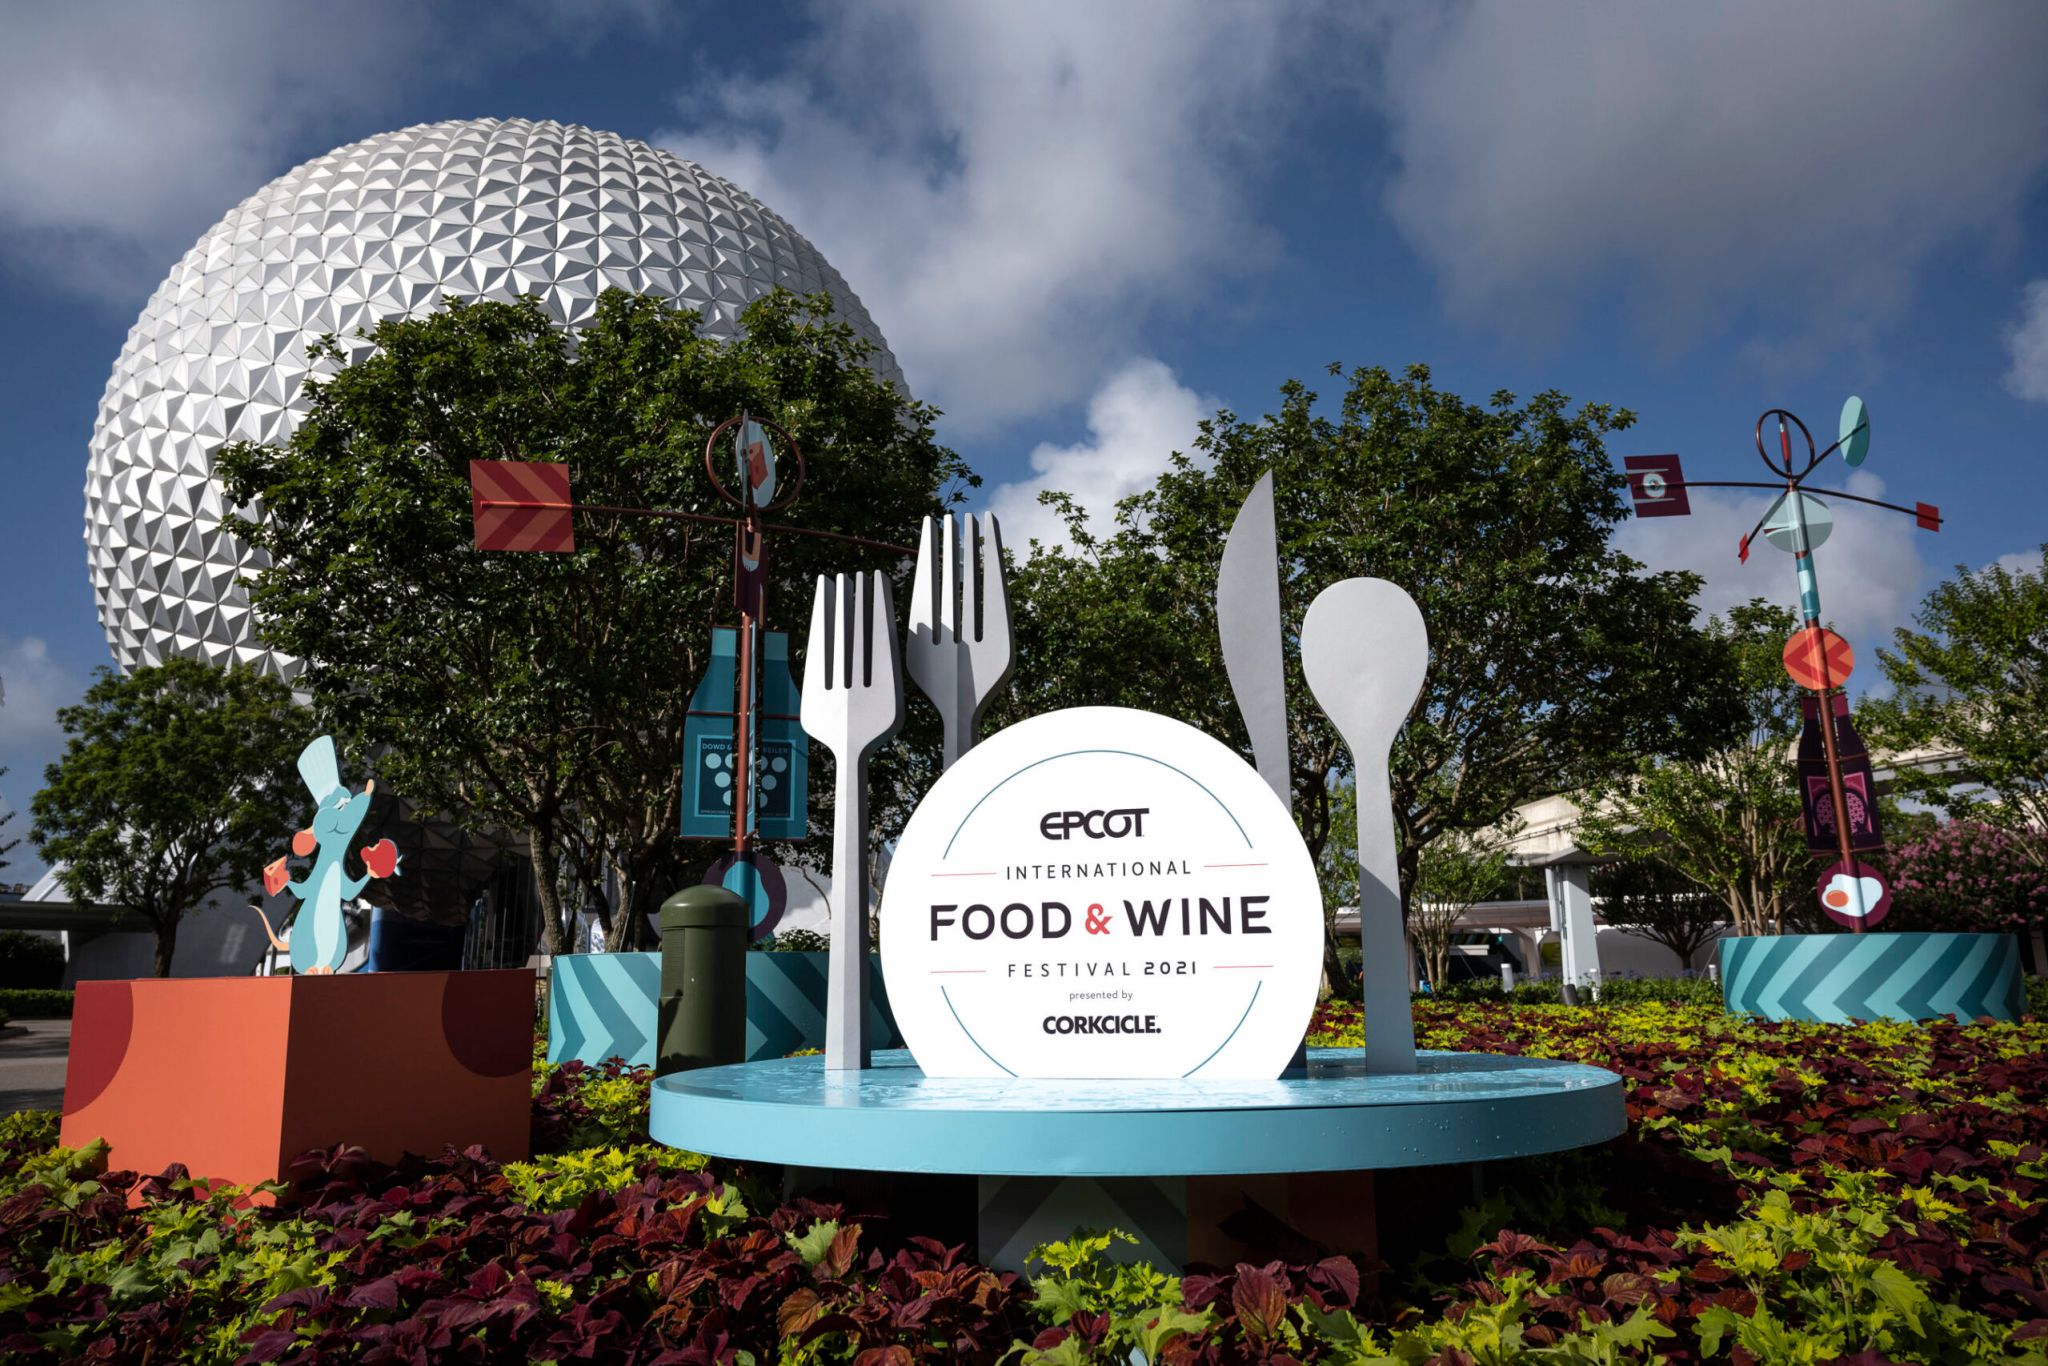 Epcot's Food And Wine Festival Is The Ultimate Vacation To Take This Year